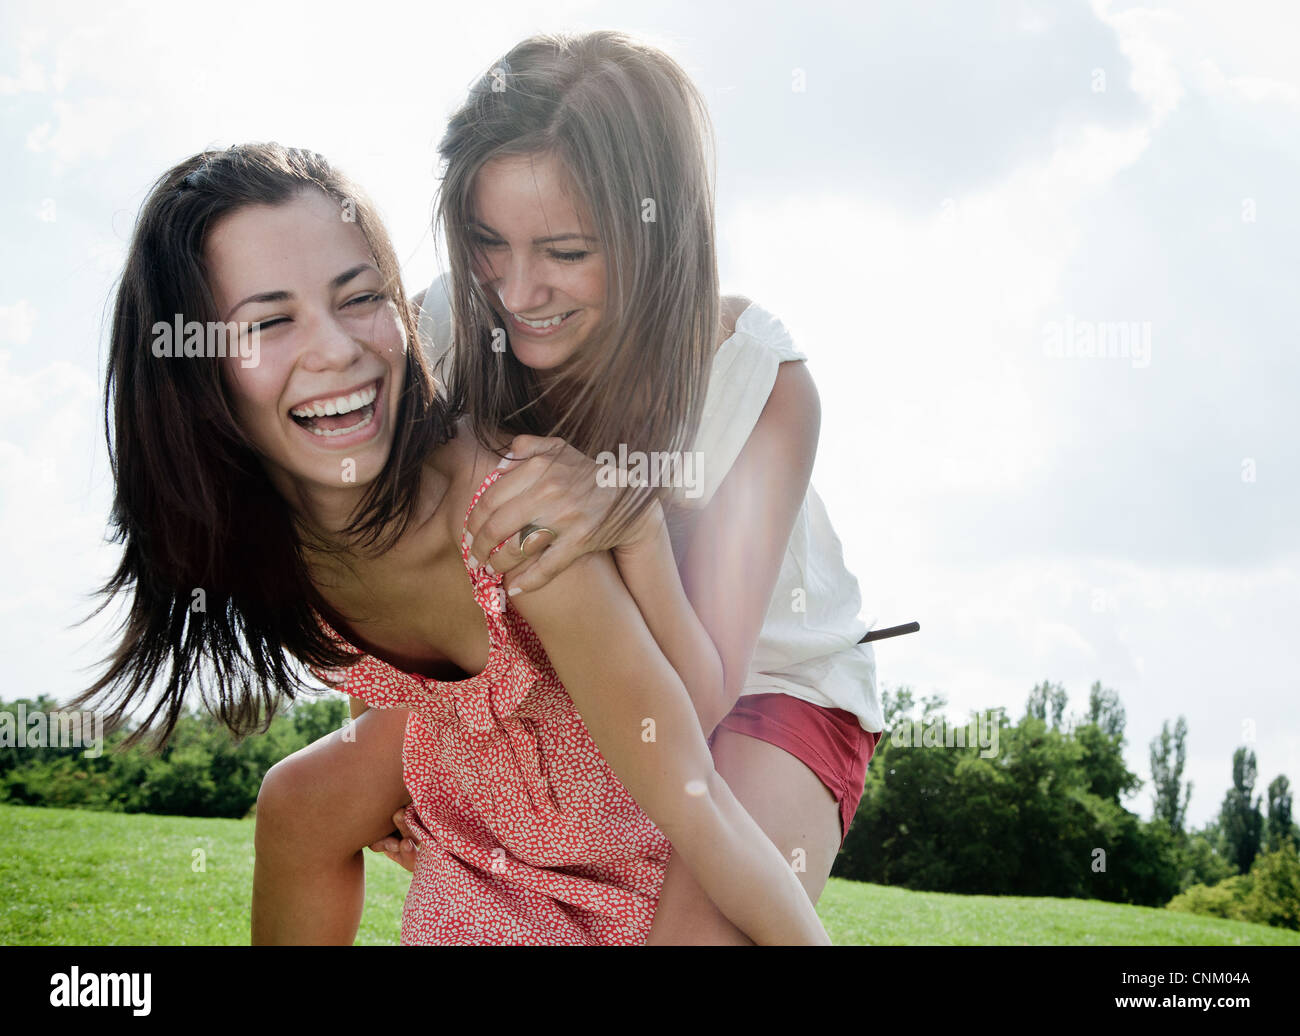 Smiling women playing outdoors together Stock Photo